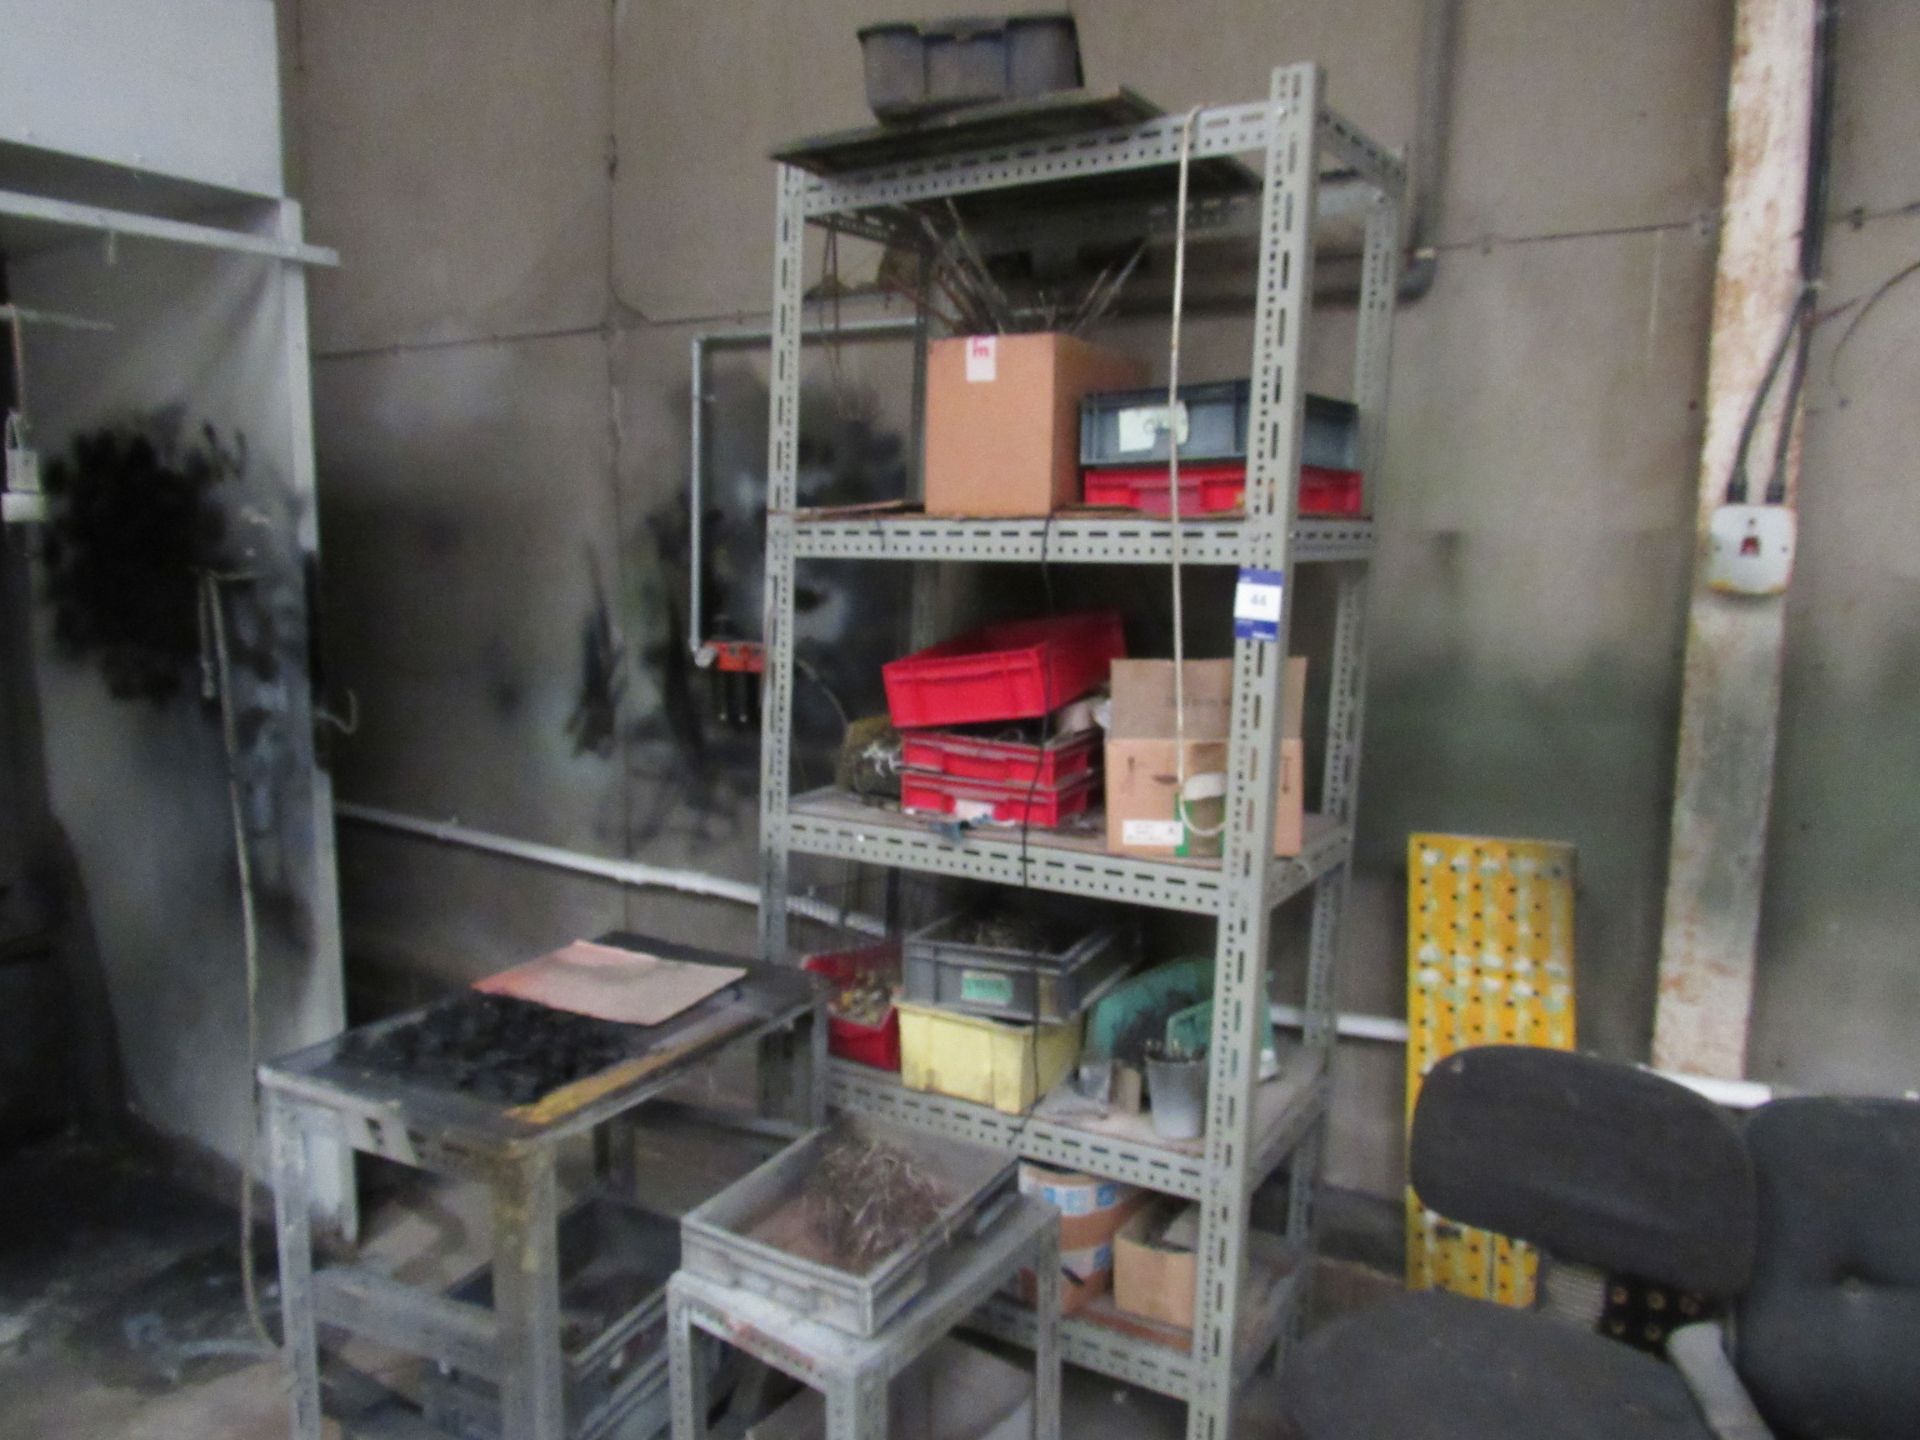 Steel Rack and Contents - Located on the first floor. The only removal access for large items is via